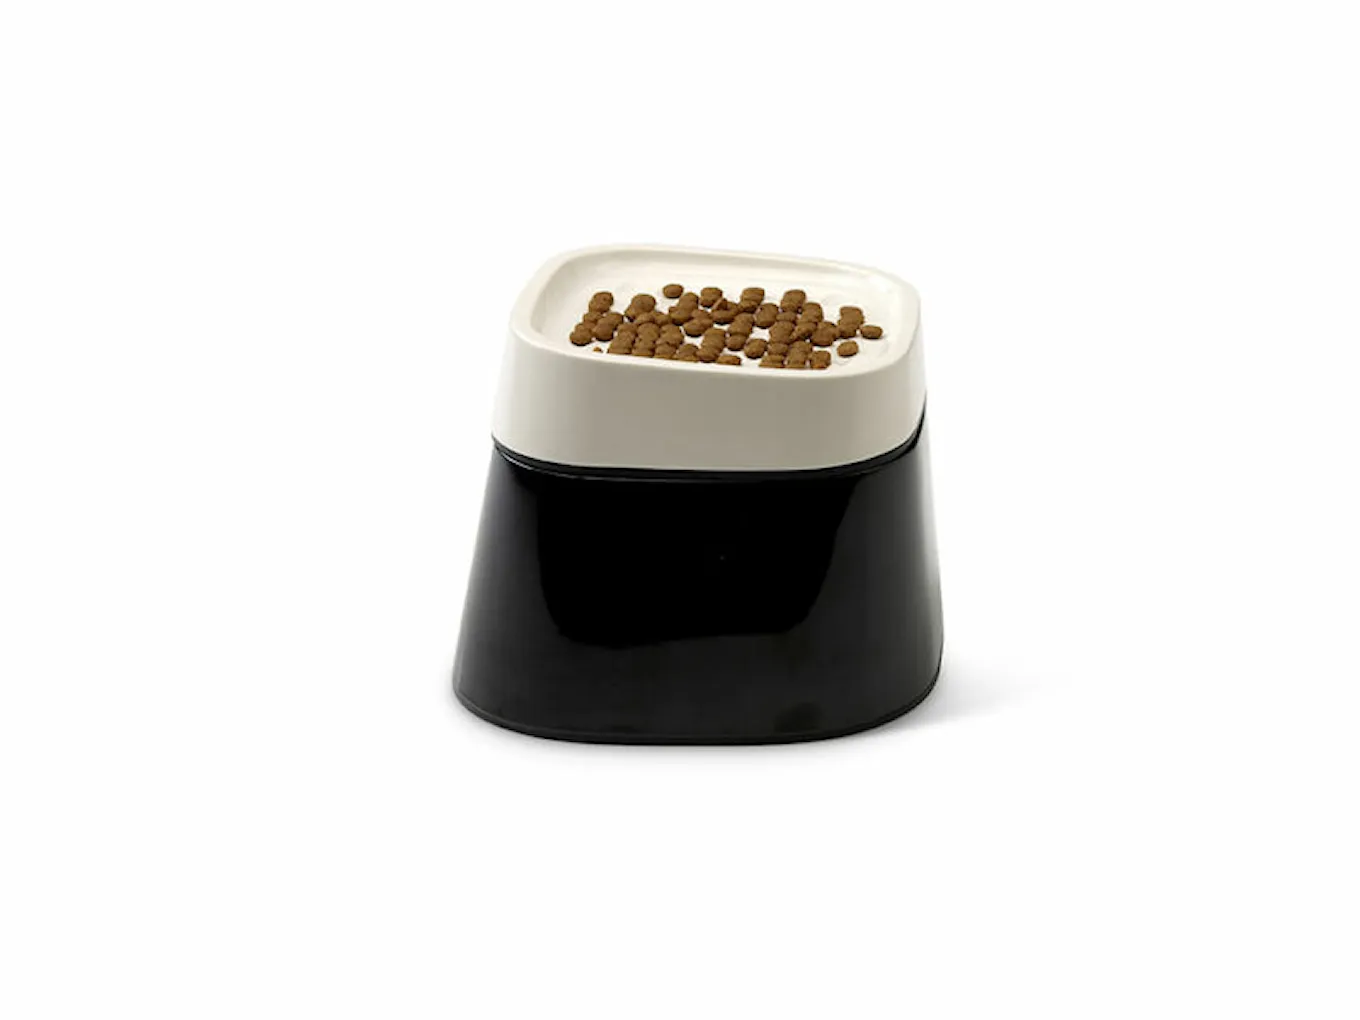 savic_dogs_cats_foodbowl_ergo_cube_elevated_003.jp